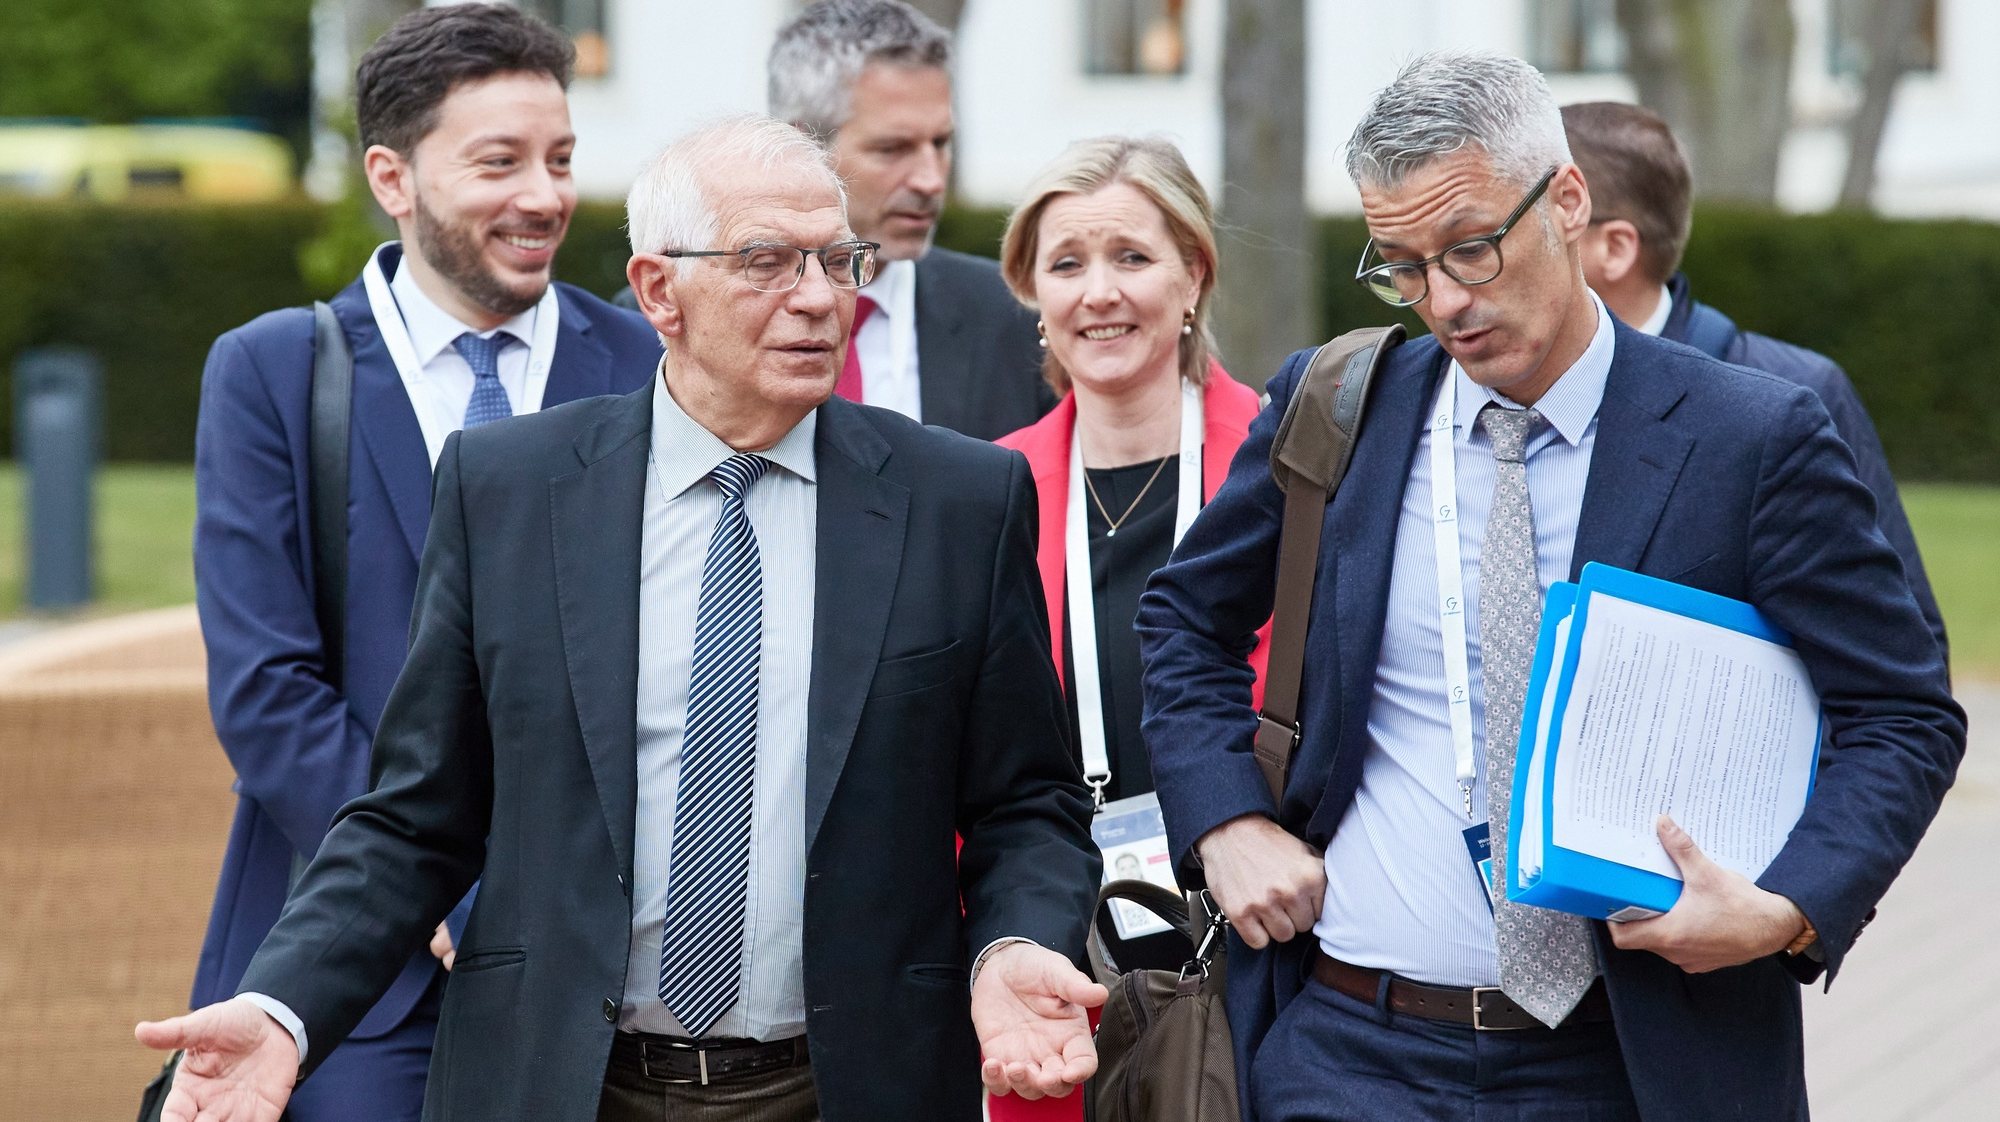 epa09943901 High Representative of the Union for Foreign Affairs and Security Policy Josep Borrell (L) arrives with delegates for the G7 Foreign Ministers Summit in Wangels, Germany, 13 May 2022.  EPA/Georg Wendt / POOL